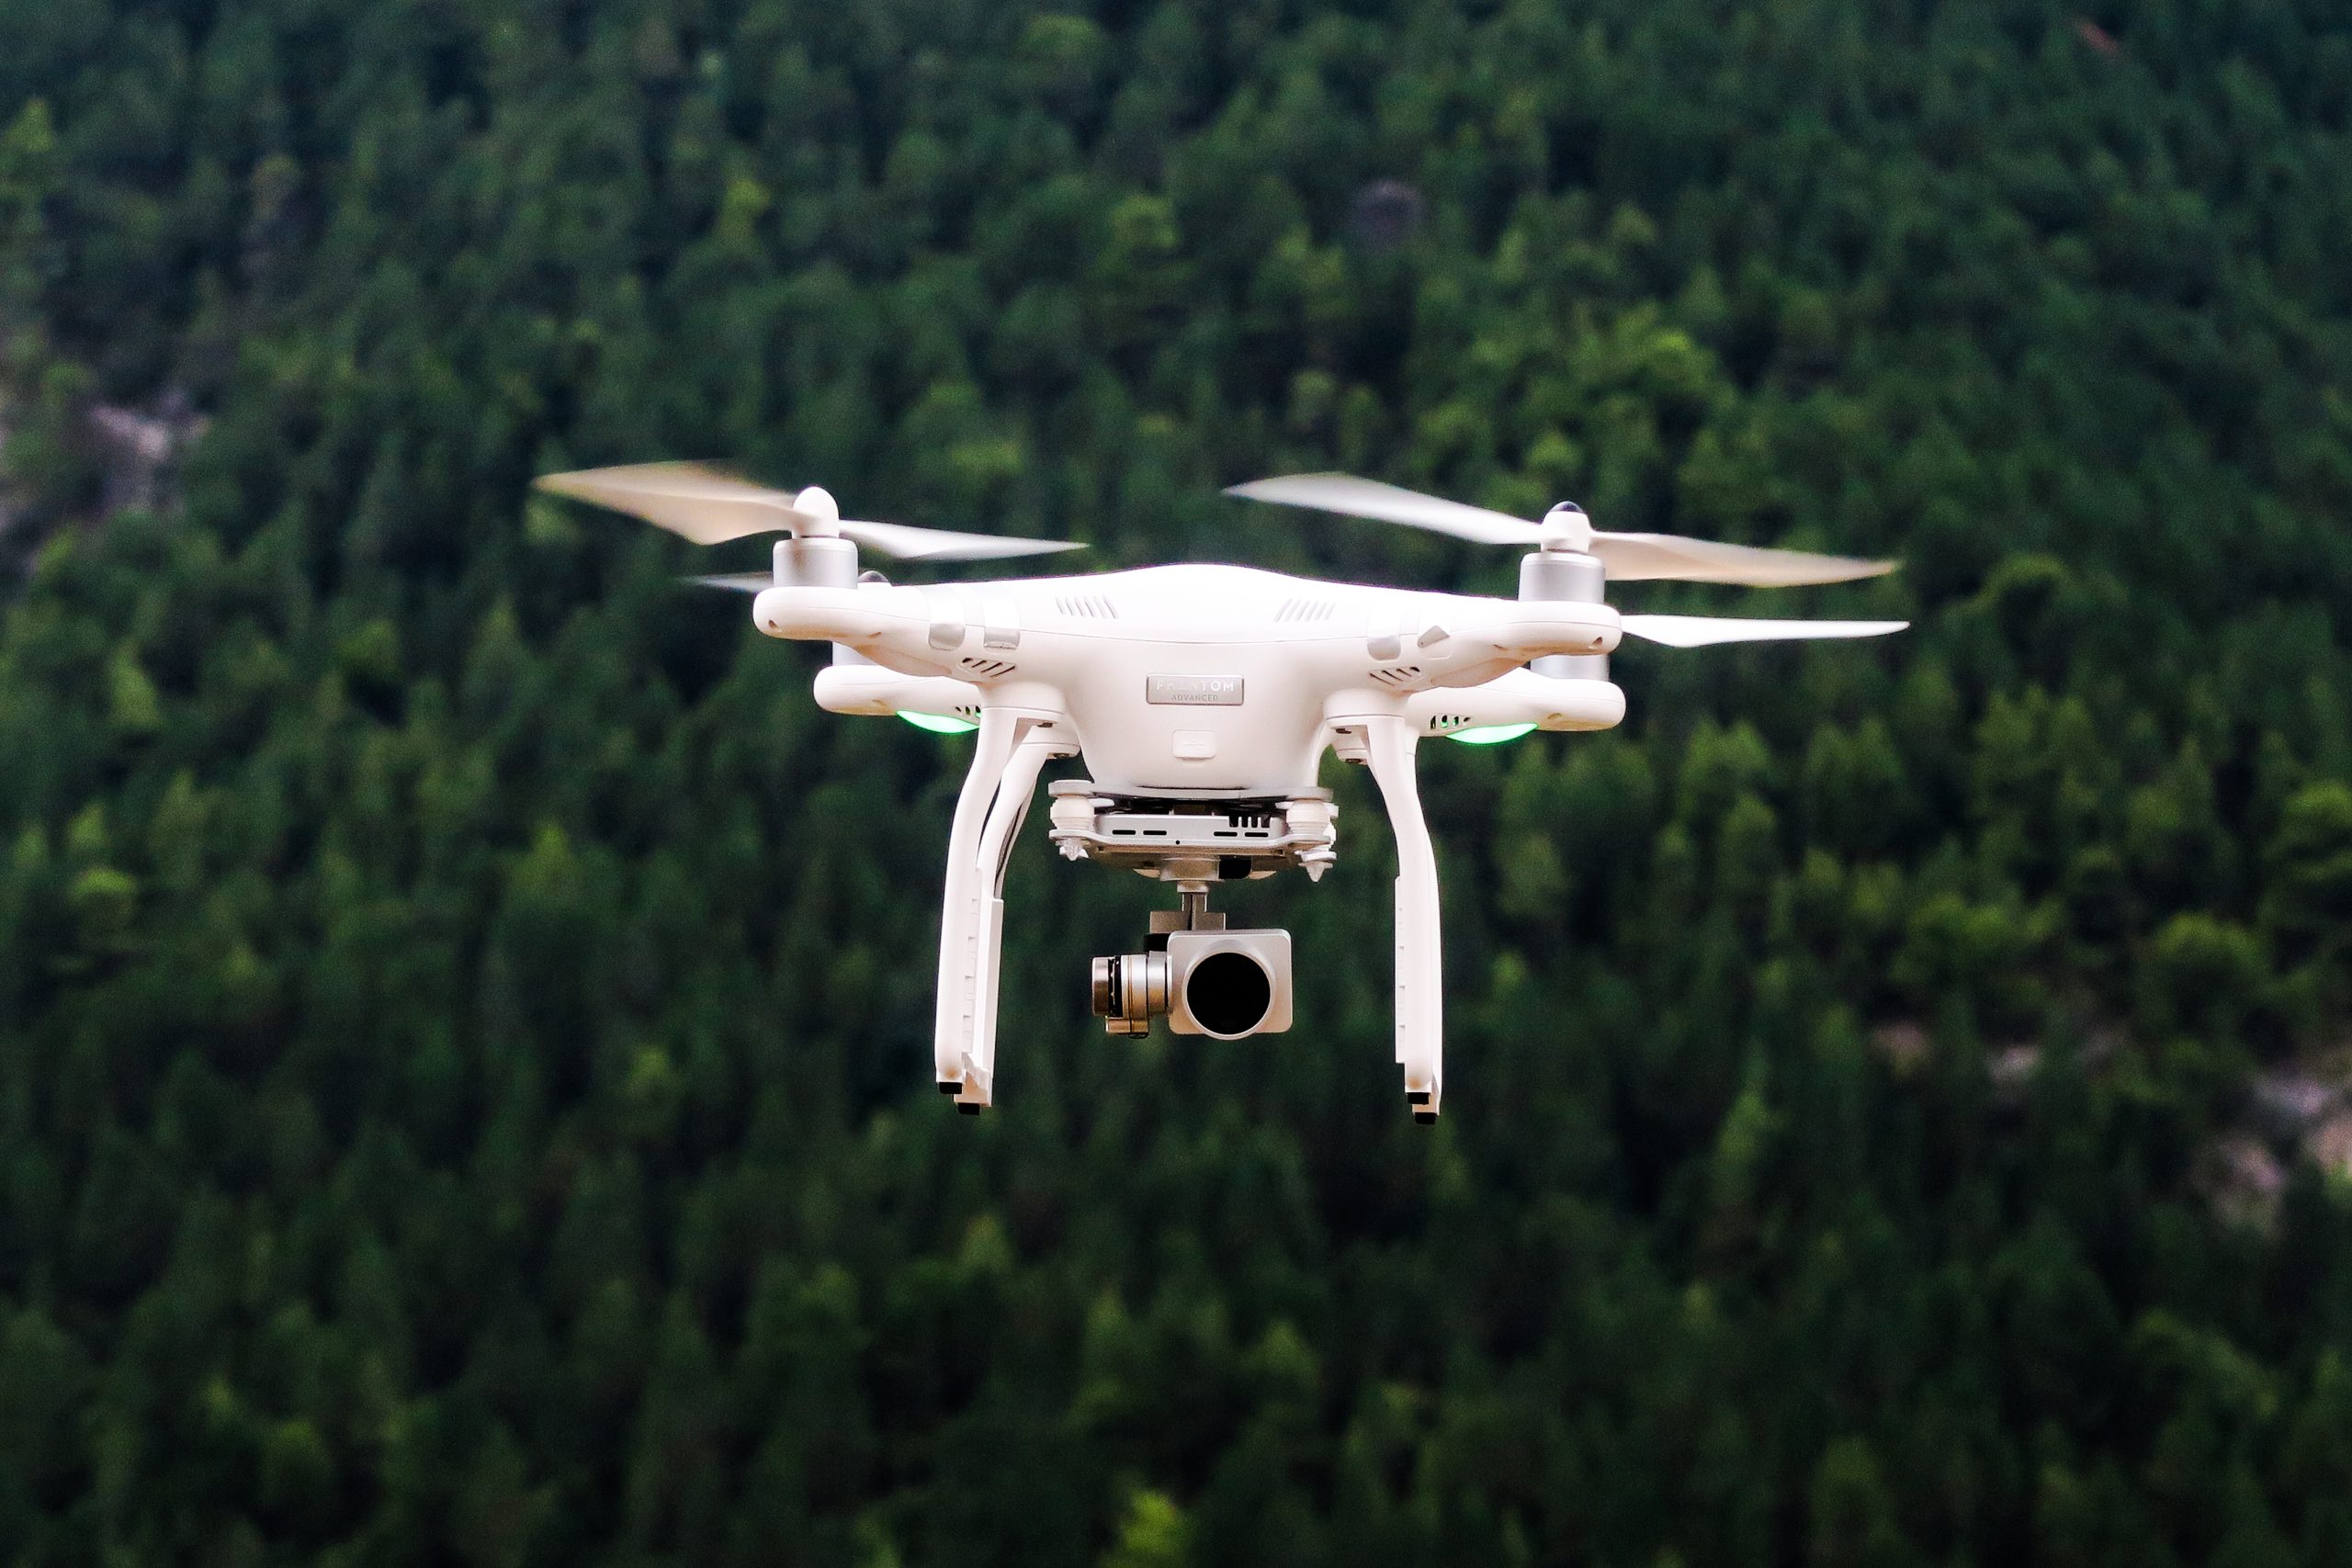 How Are Drones Used In Soccer Training And Analysis?